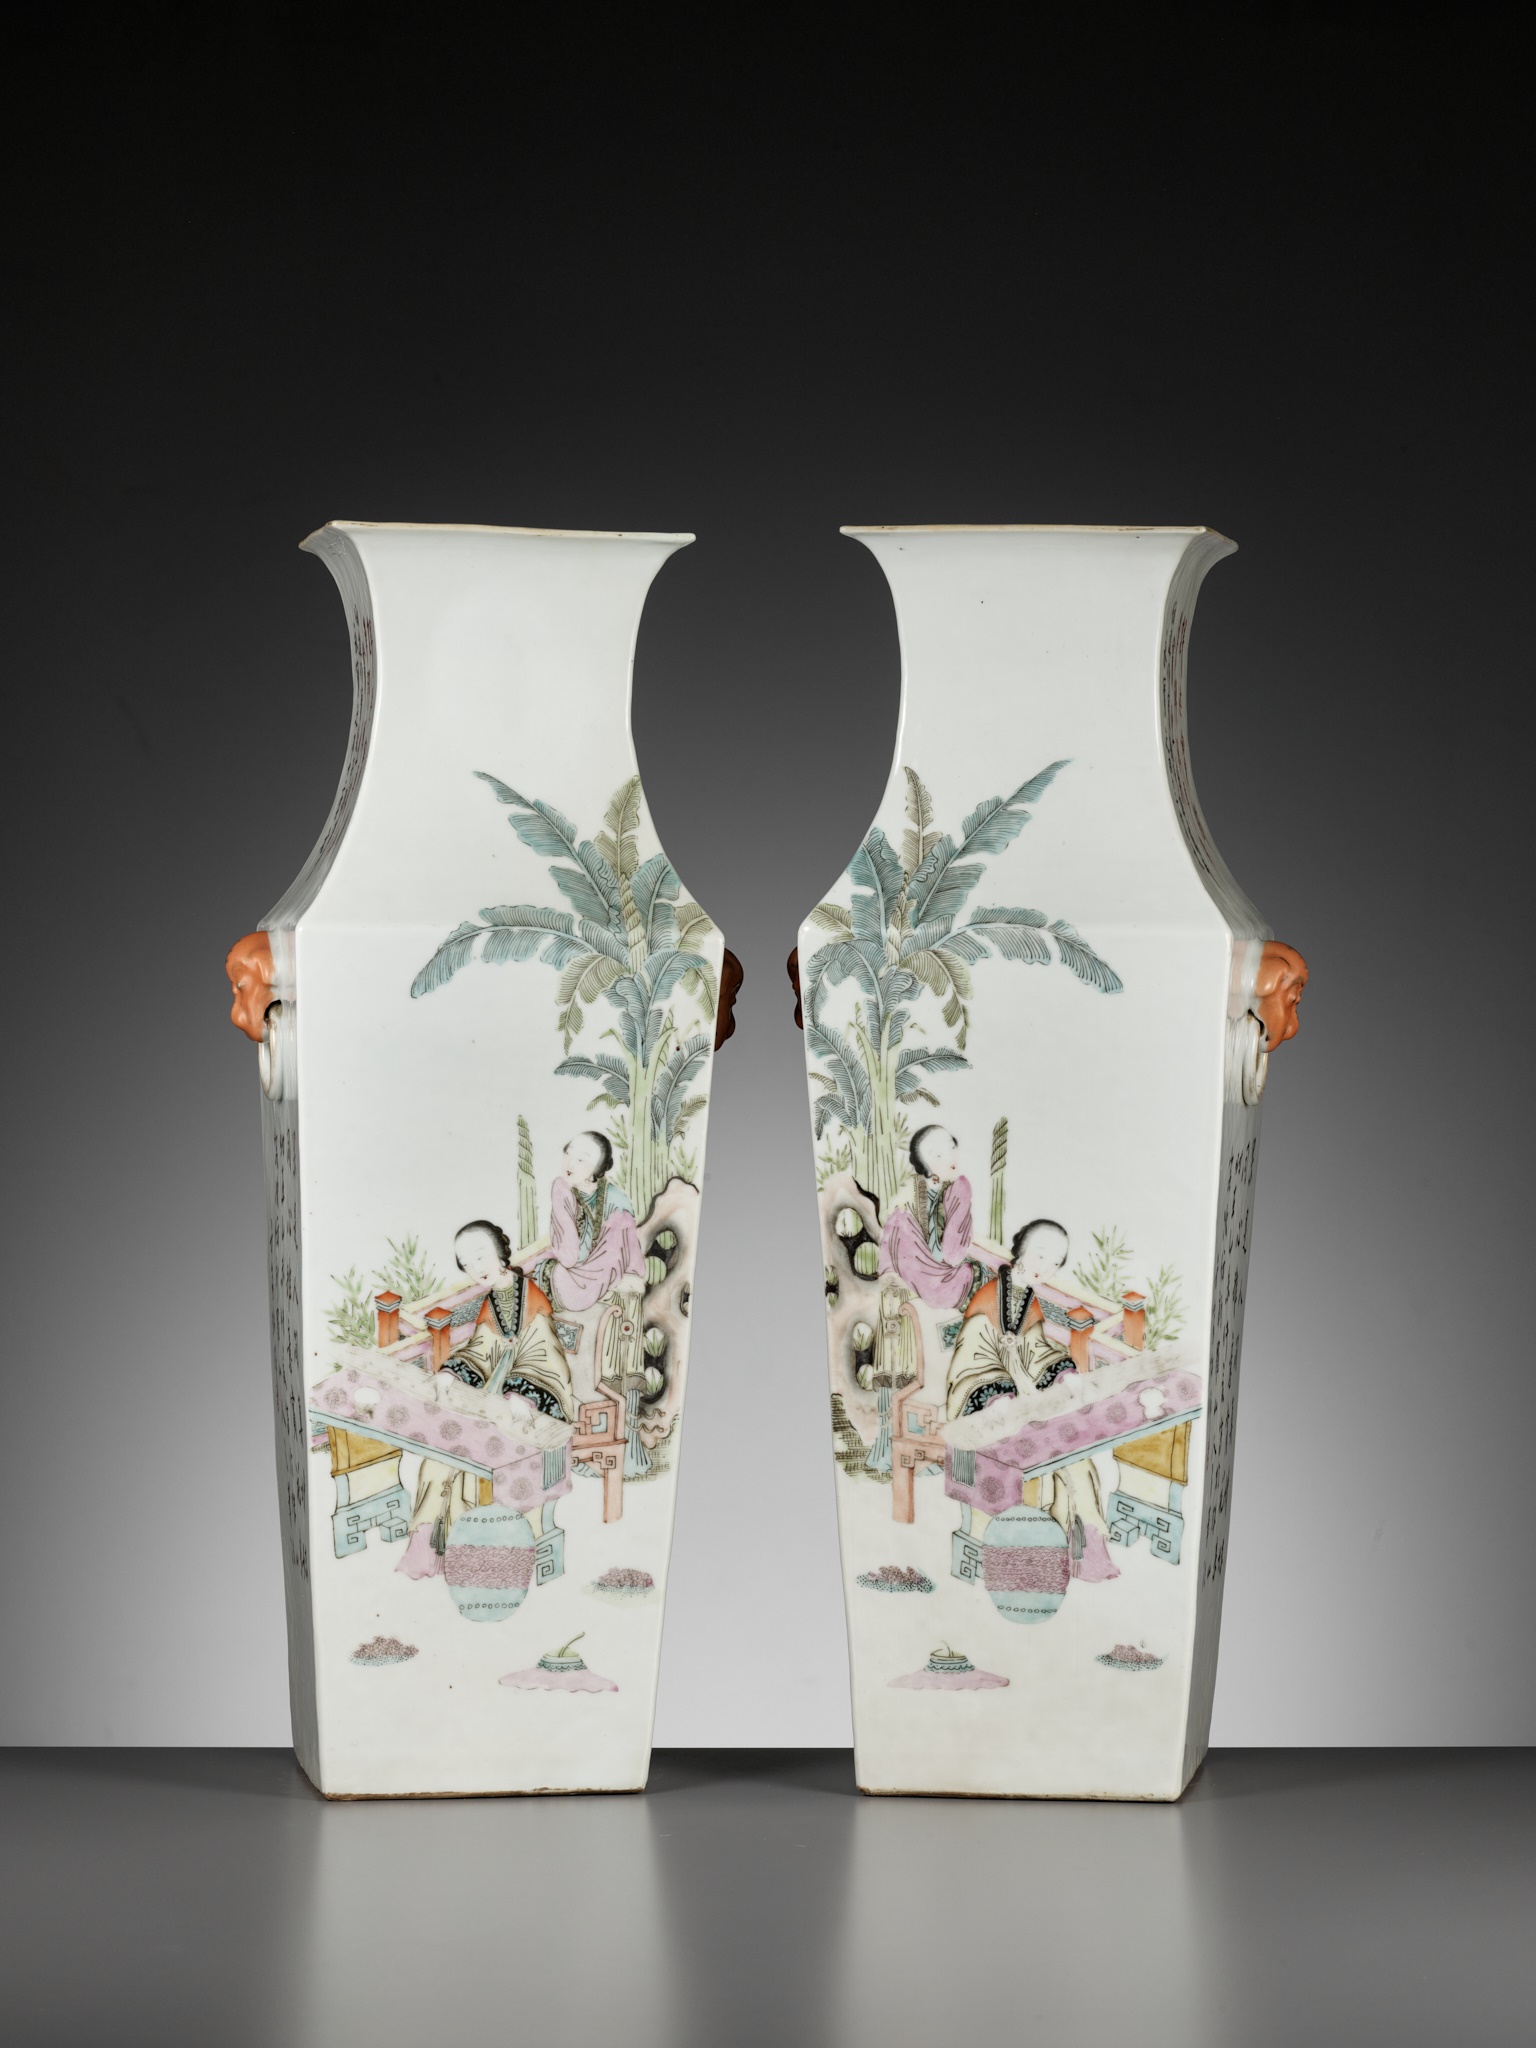 A PAIR OF LARGE QIANJIANG CAI VASES, BY FANG JIAZHEN, CHINA, DATED 1895 - Image 11 of 17